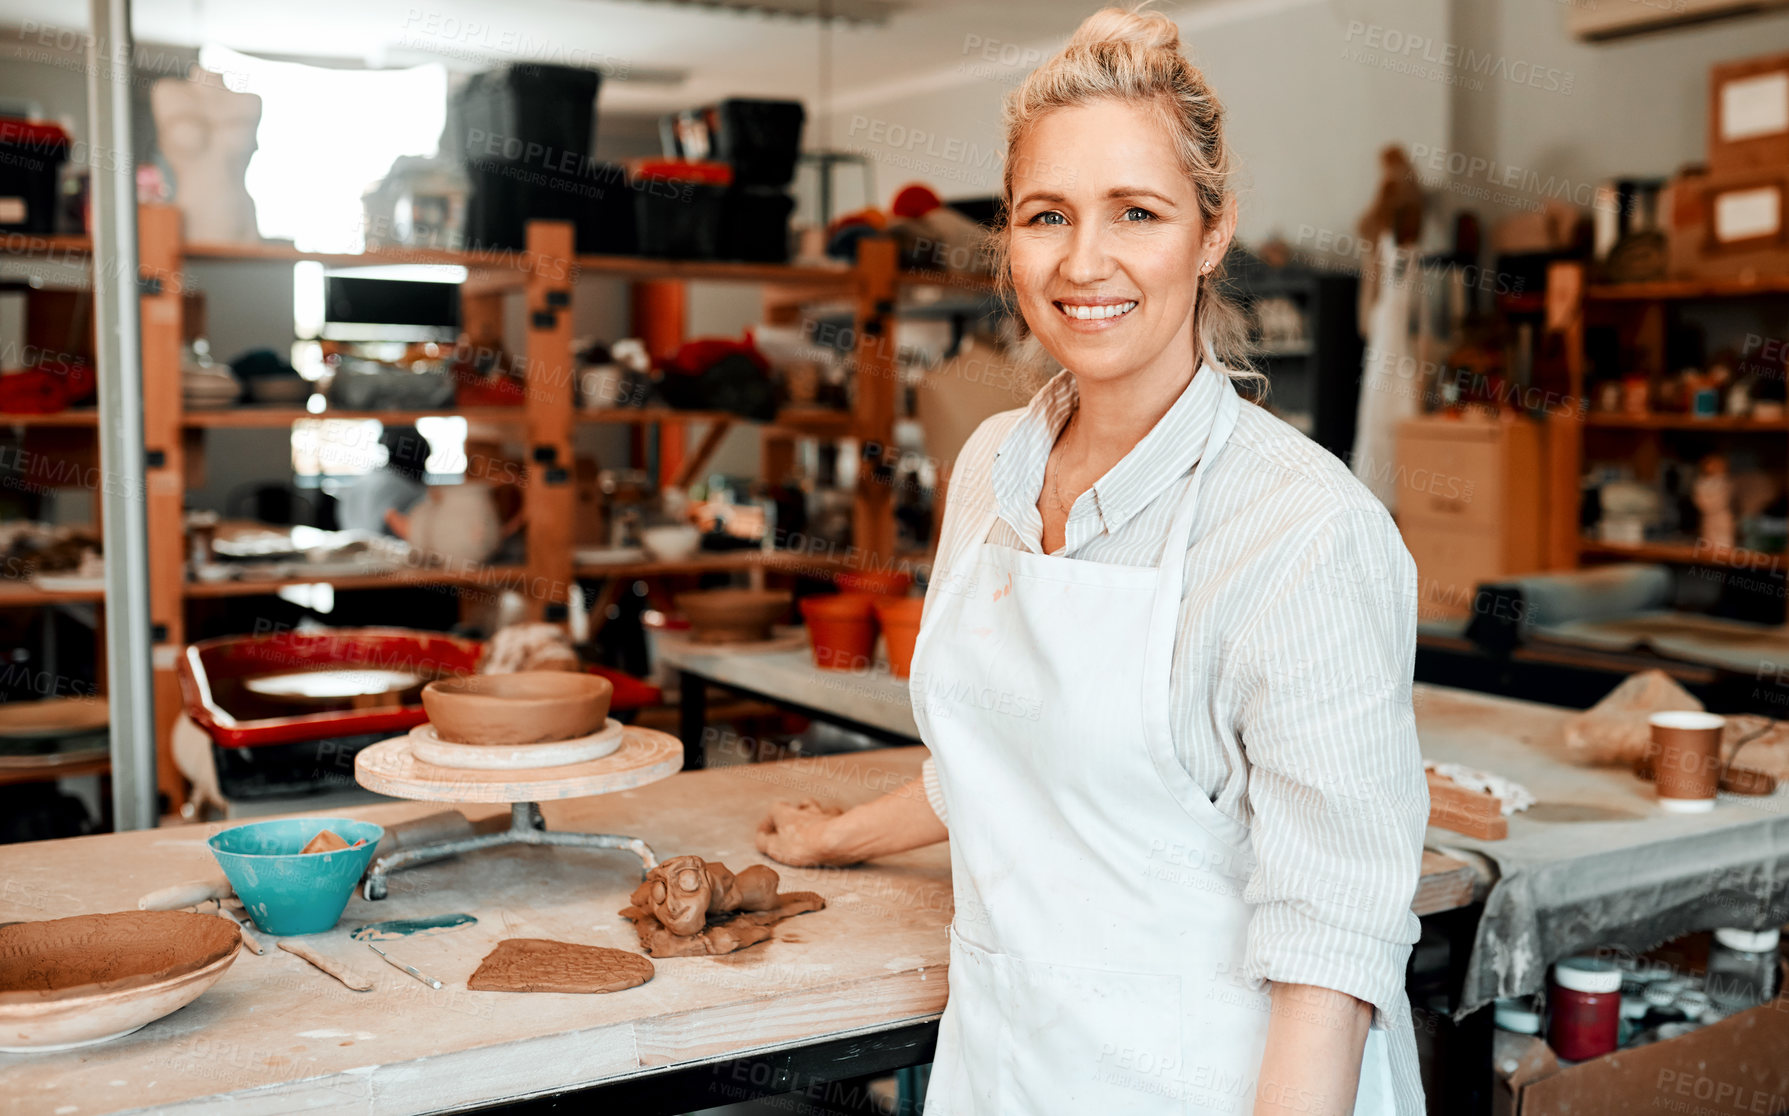 Buy stock photo Portrait of a female artisan standing in her pottery workshop